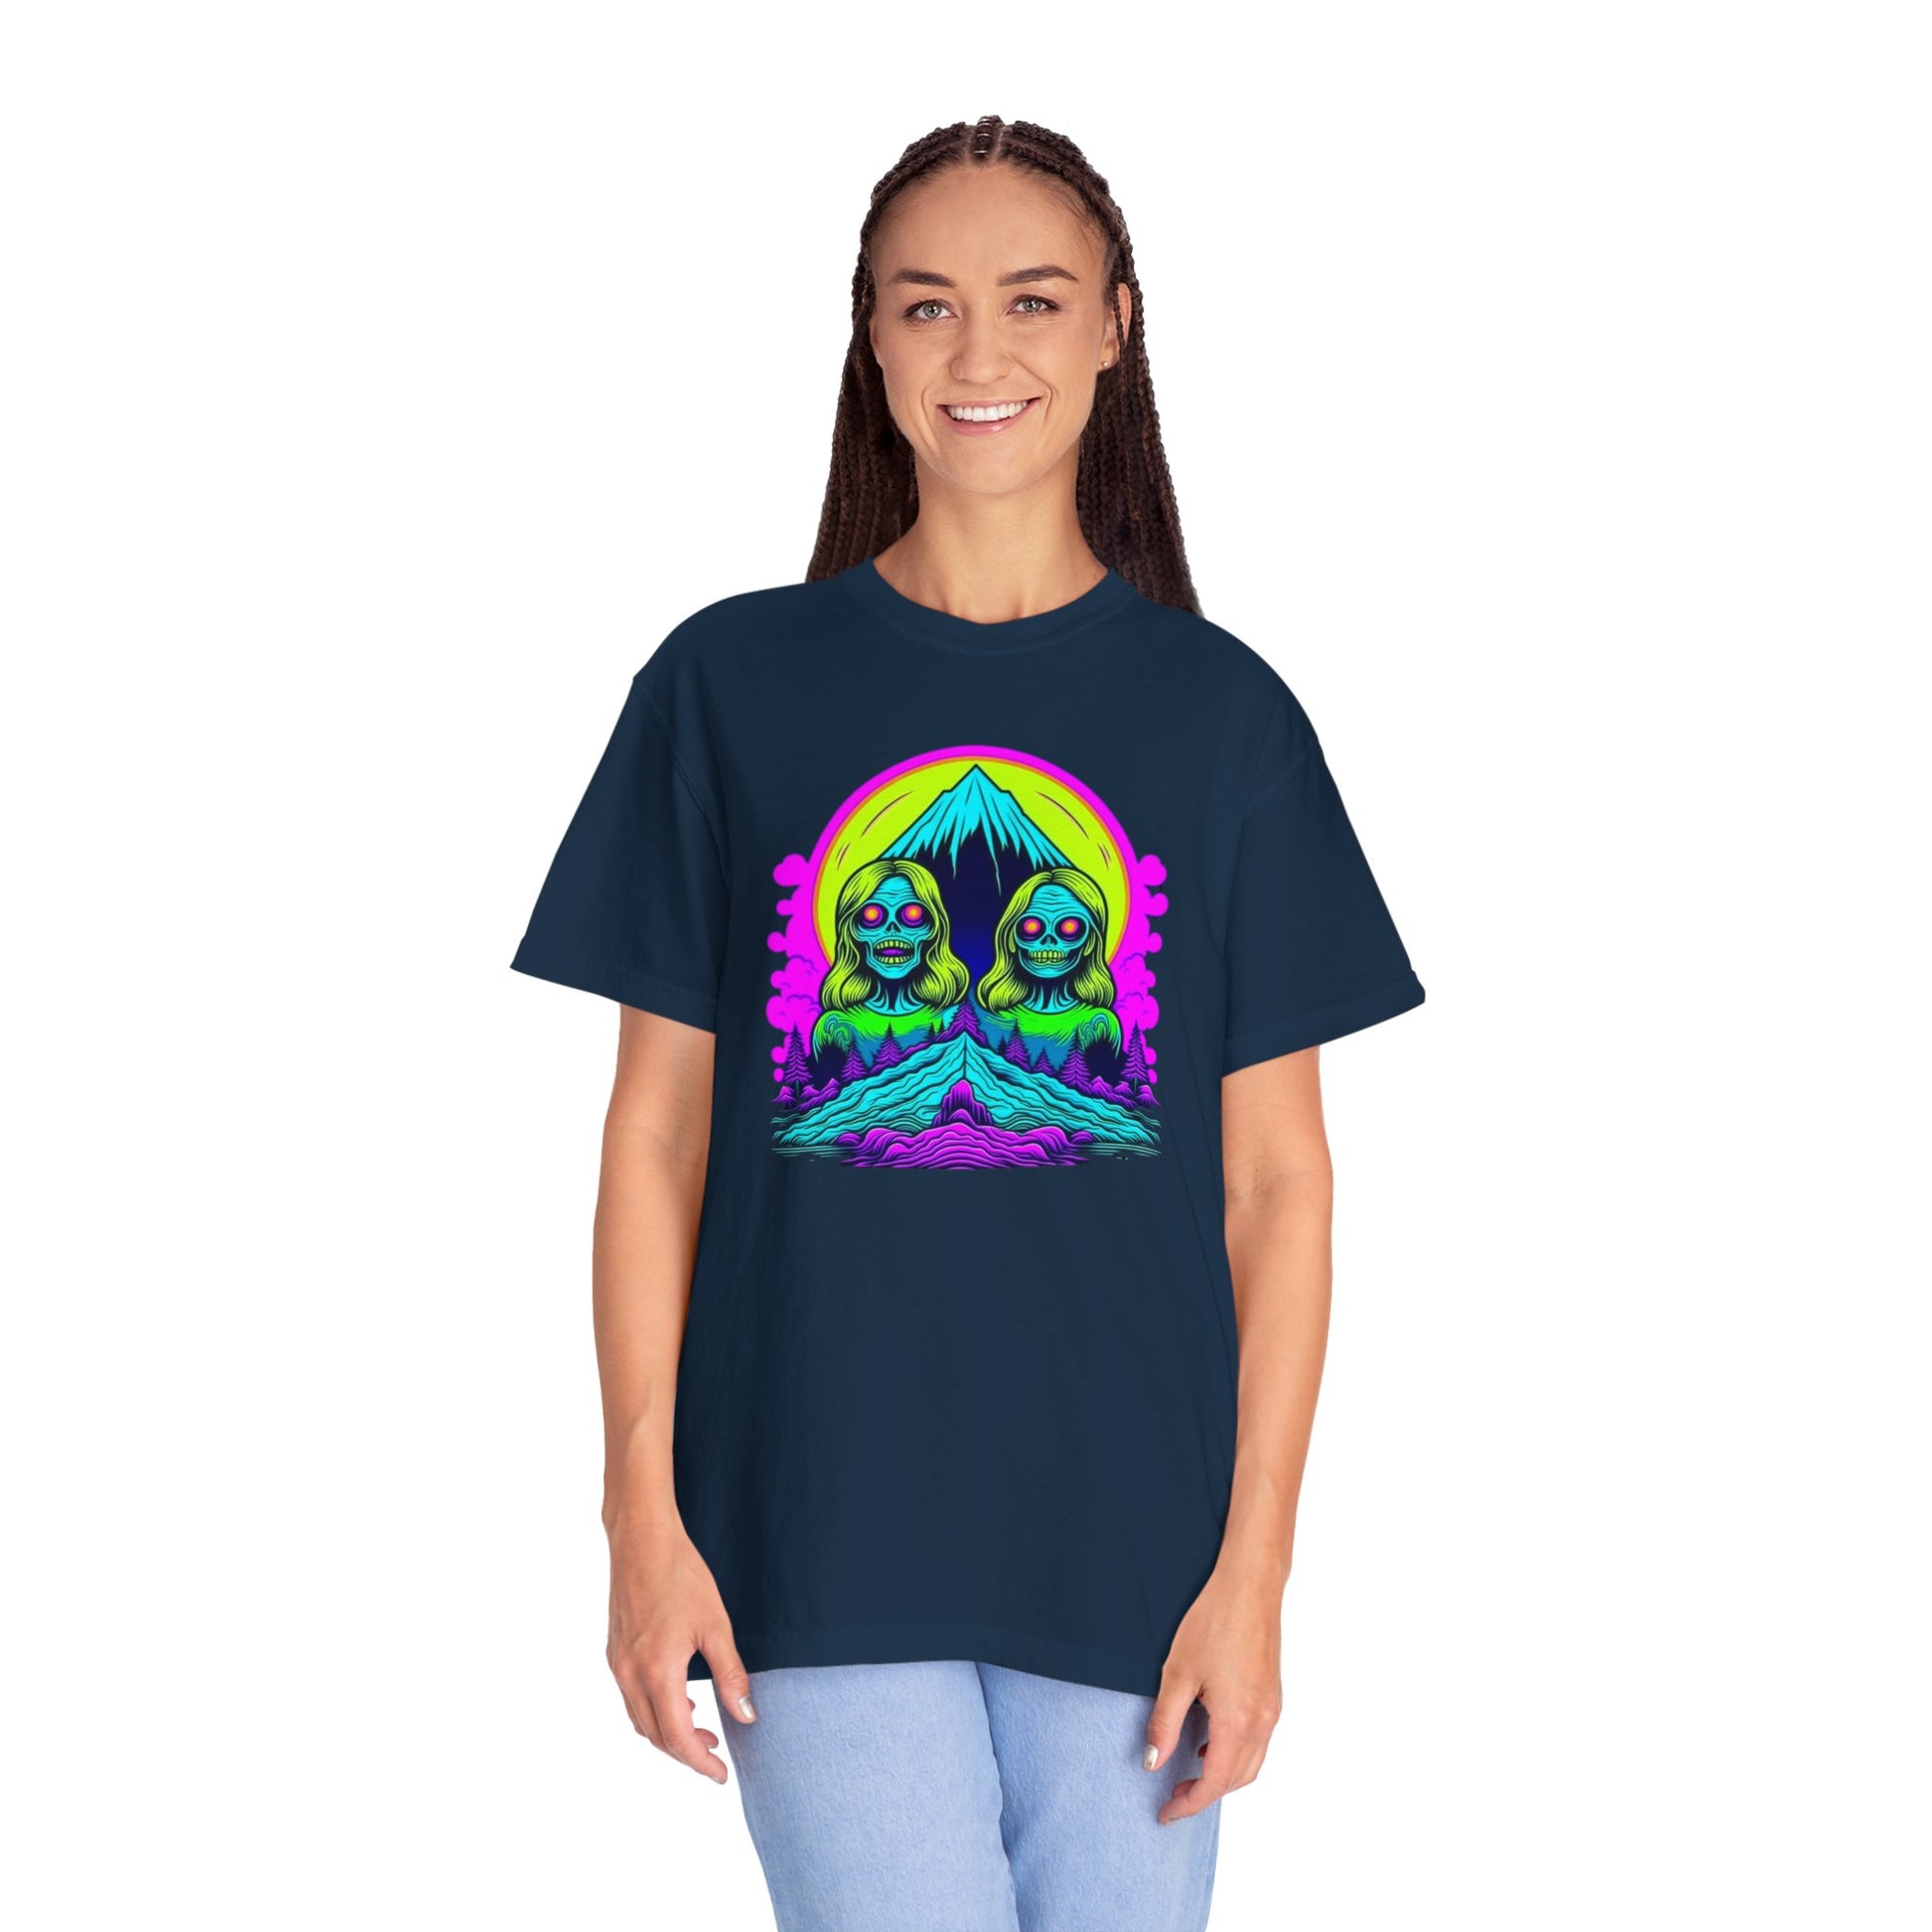 Woman in a stylish Zombie Tee T-shirt